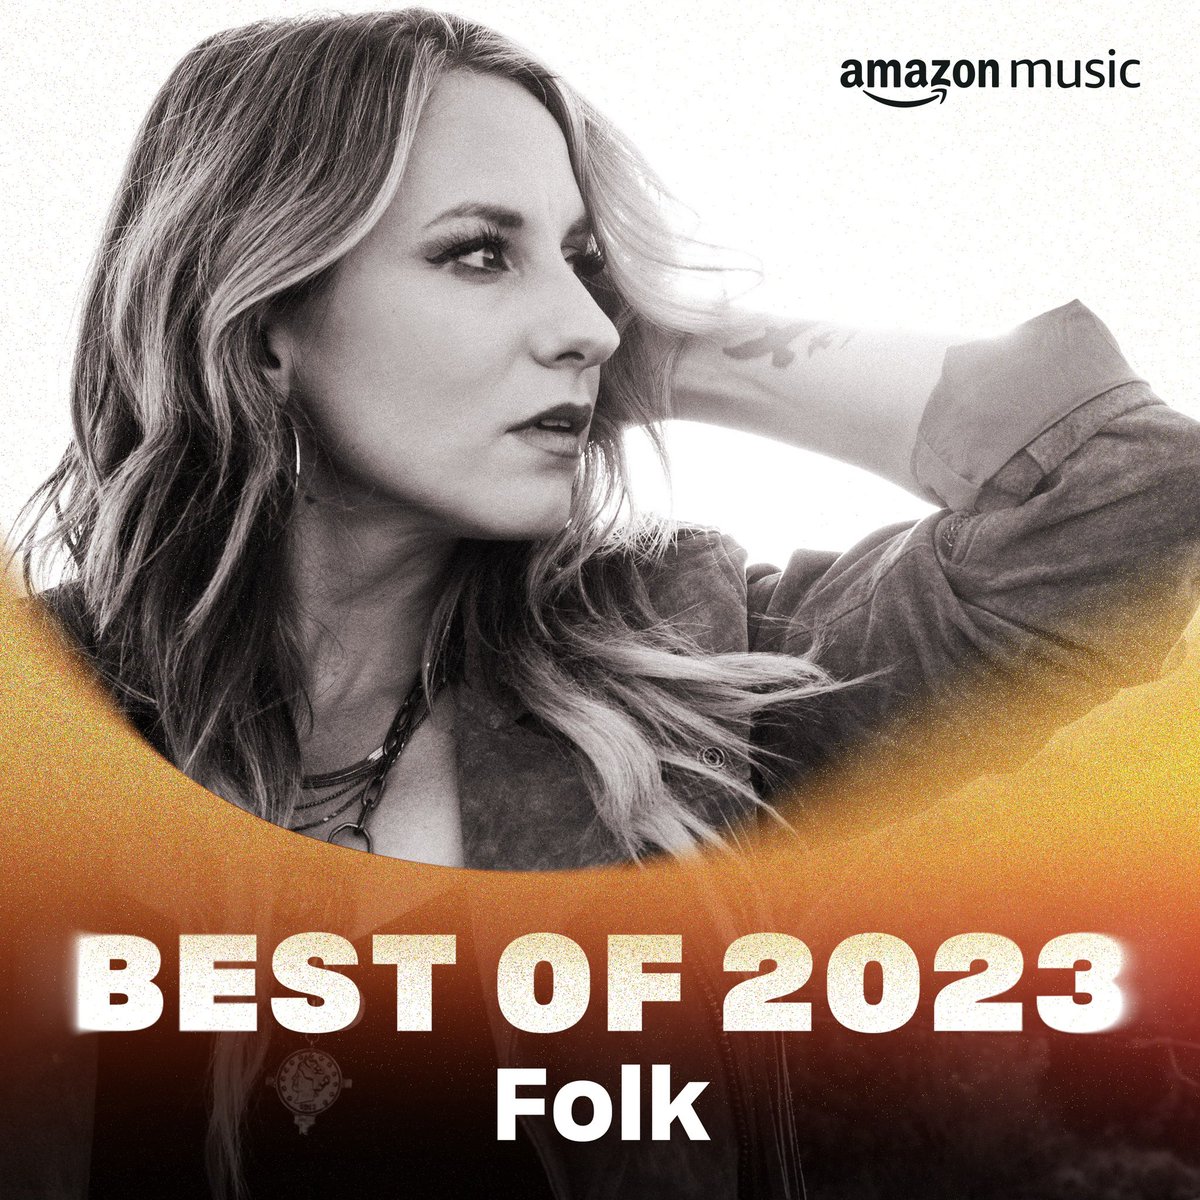 Thank you, @amazonmusic for including me on this wonderful playlist. Very honored. 🤍 Y’all be sure to ask Alexa to play you the Best of 2023 Folk, and hear my song “Lately” Written with my dear friends @gordiesampson @troyverges 🤍